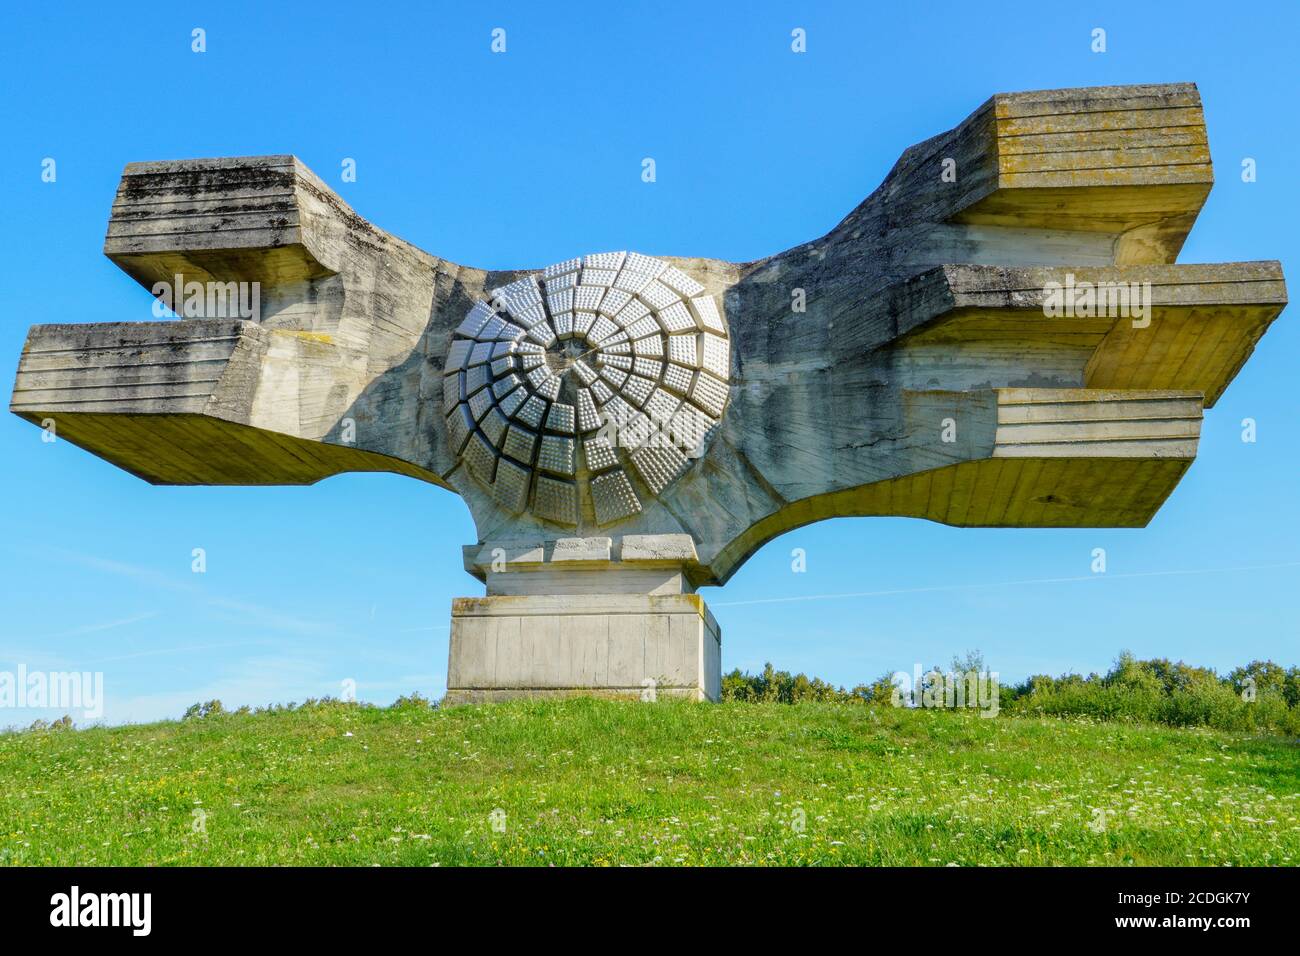 PODGARIC,CROATIA - AUGUST.27.2020. The Monument to the Revolution of the People of Moslavina in Bjelovar-Bilogora County, central Croatia - a Yugoslav Stock Photo